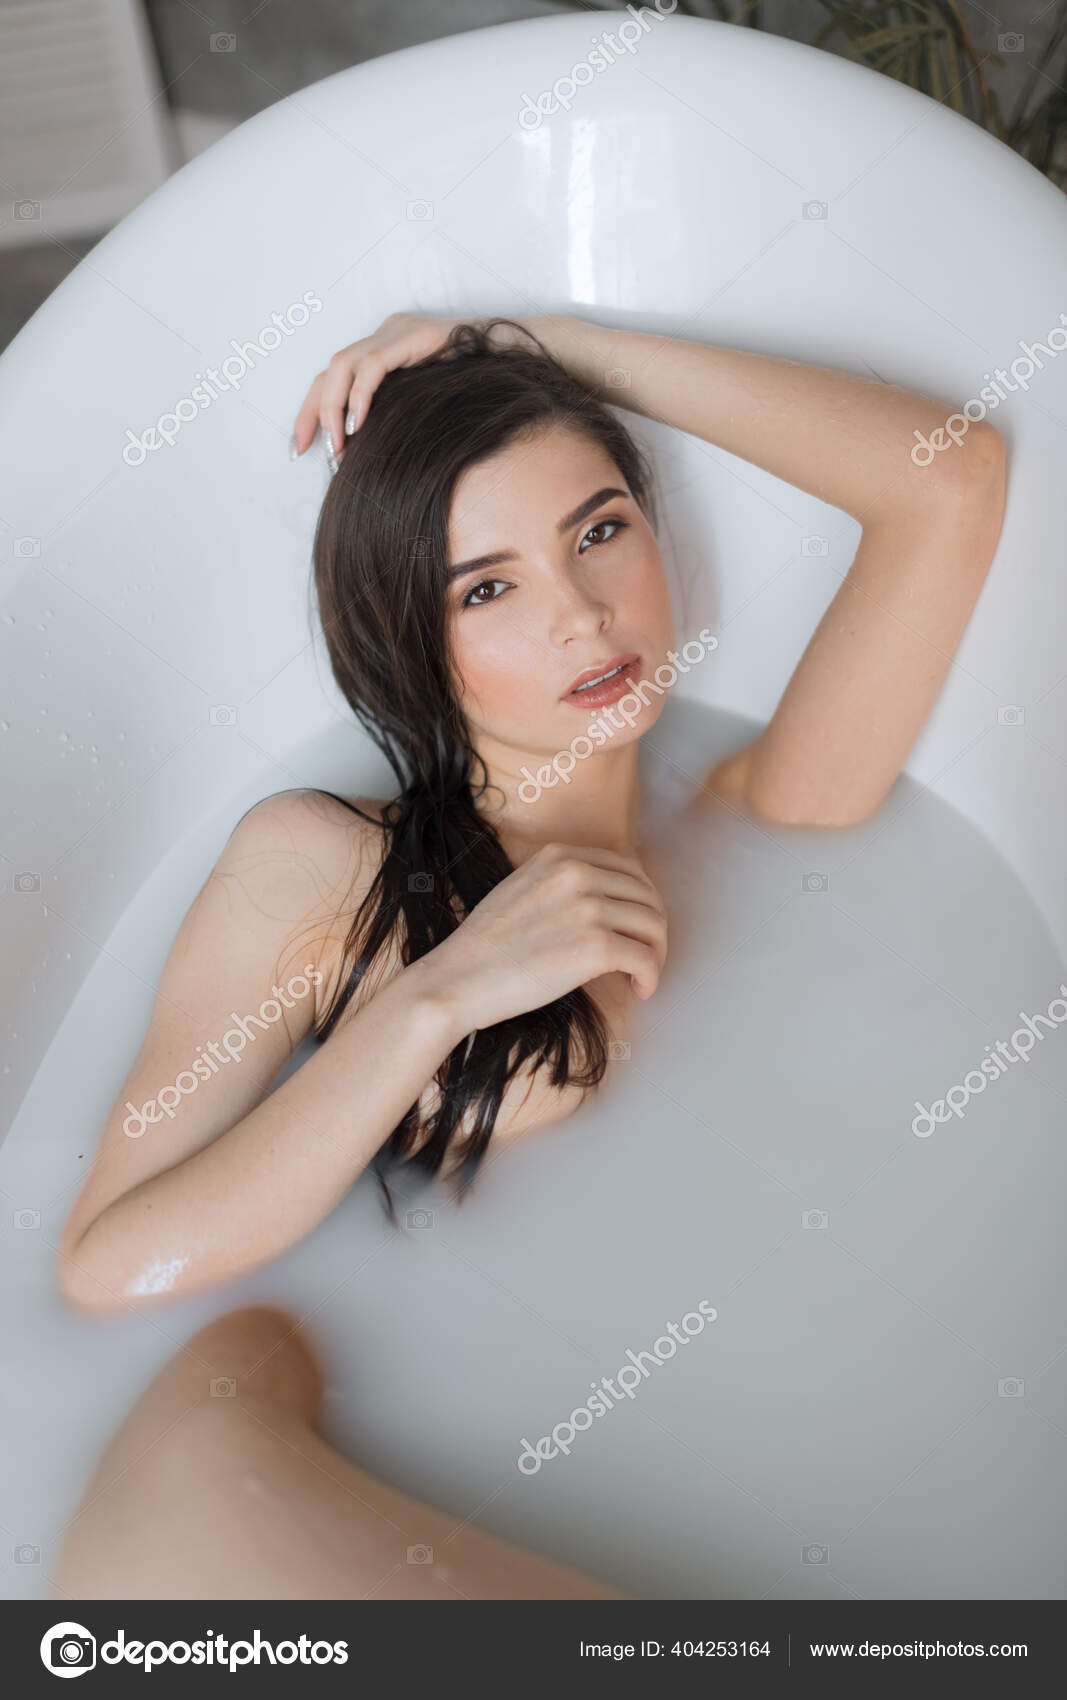 Attractive girl with open eyes takes a milk bath, touching her face